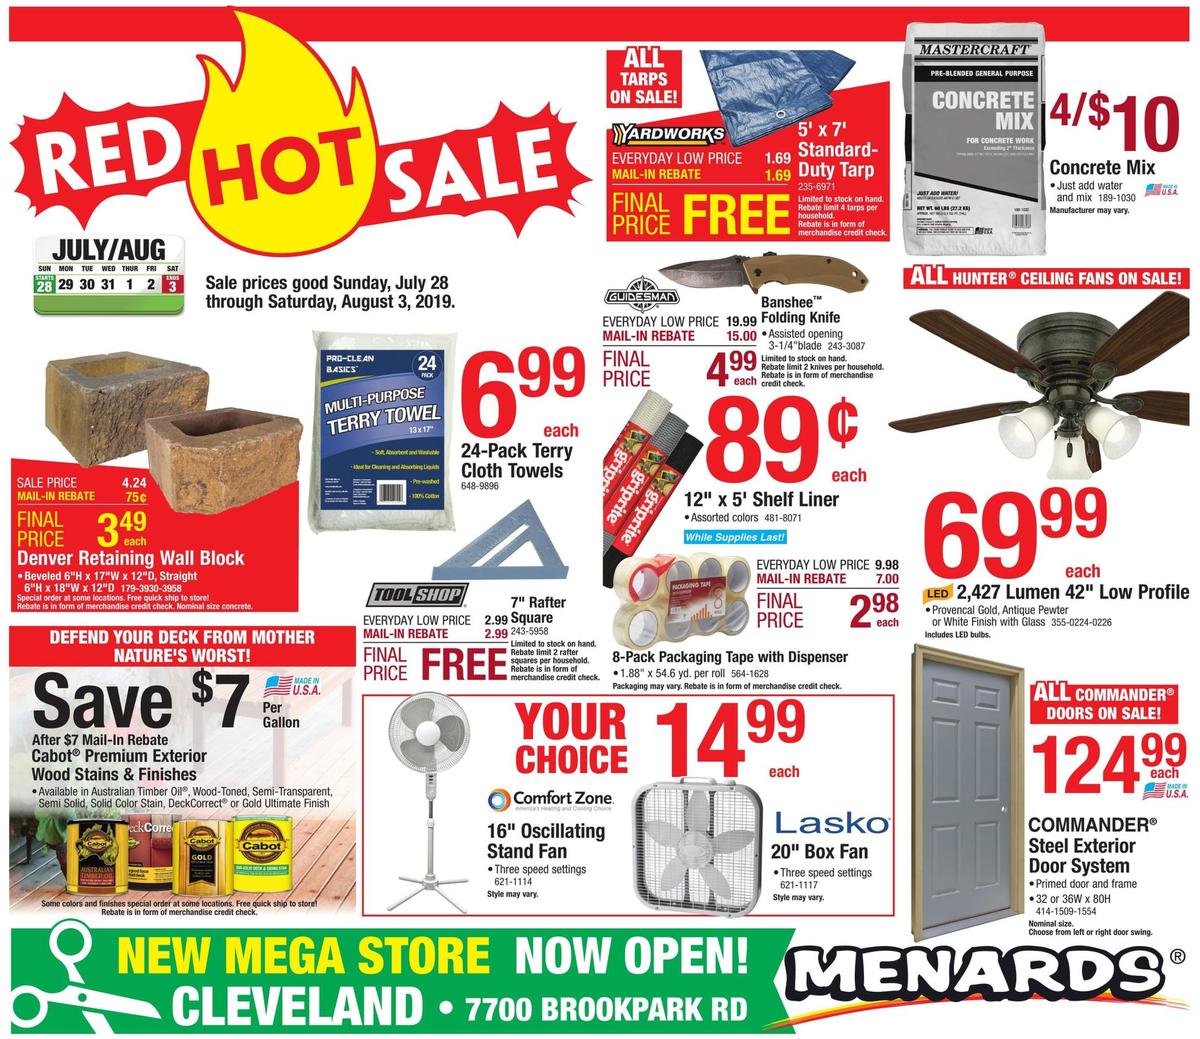 Menards Red Hot Sale Weekly Ad from July 28